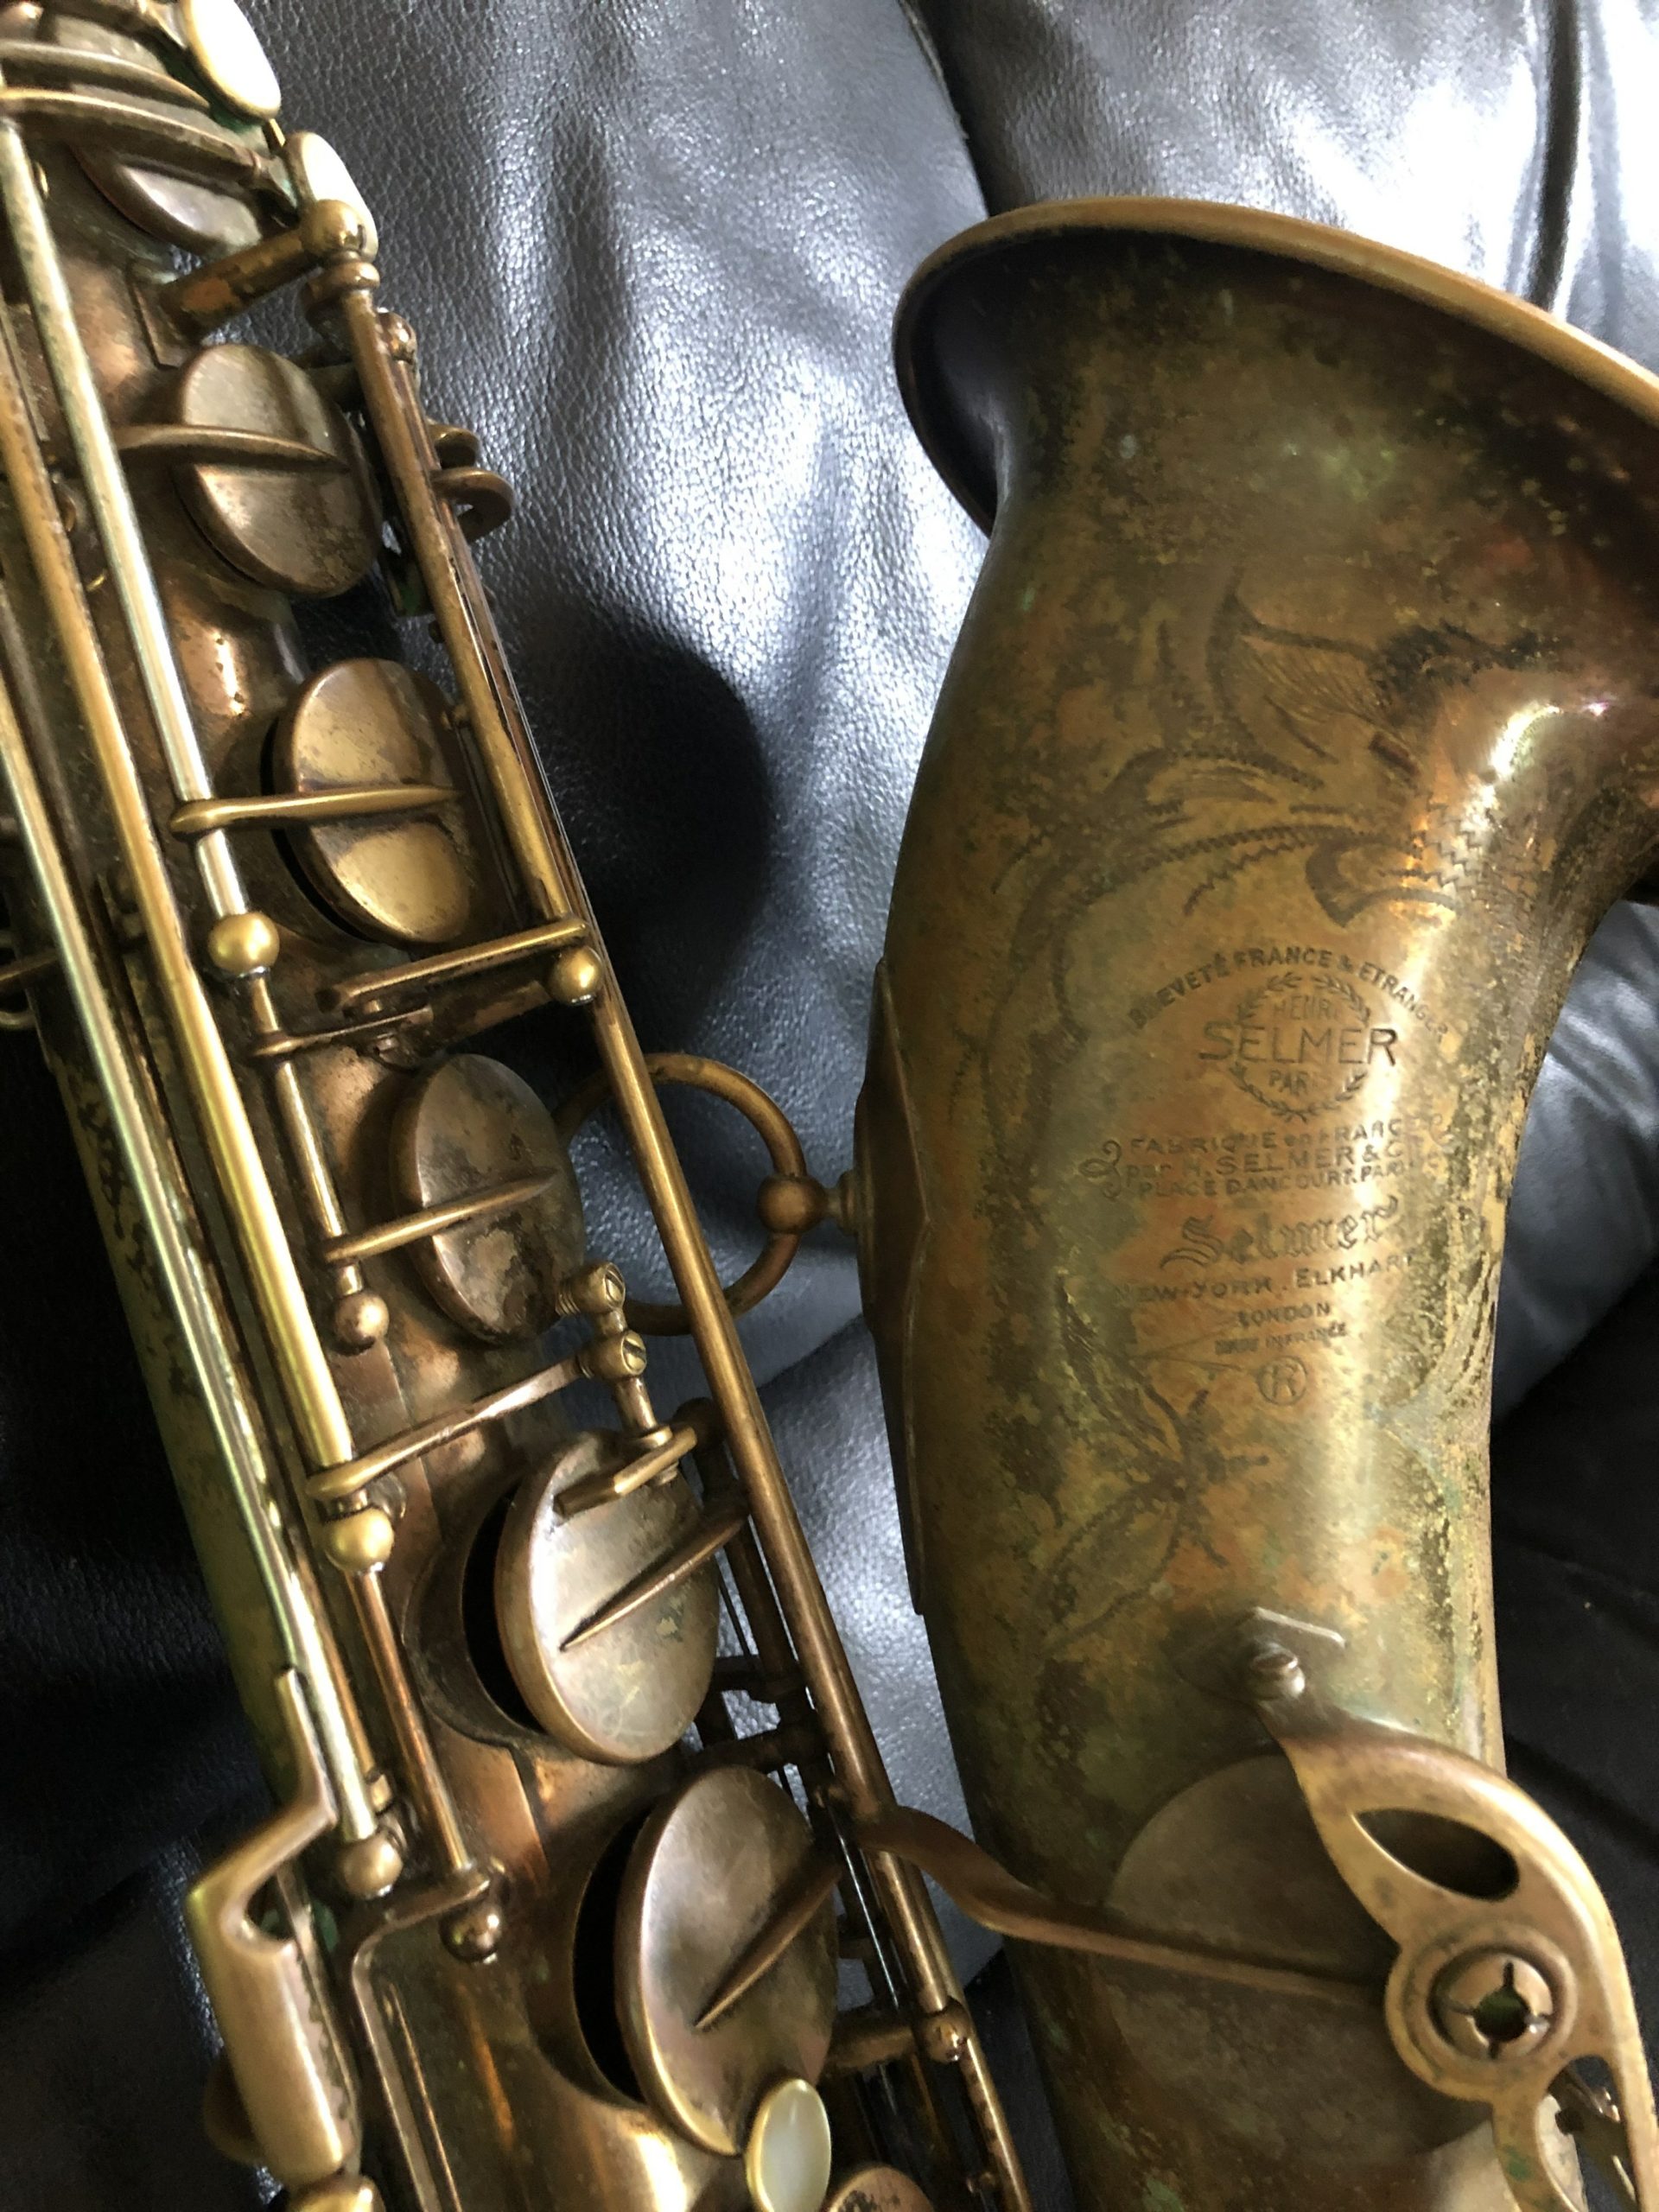 Pat DeRosa still plays the Selmer Mark VI saxophone he purchased in the 1940s. CAILIN RILEY